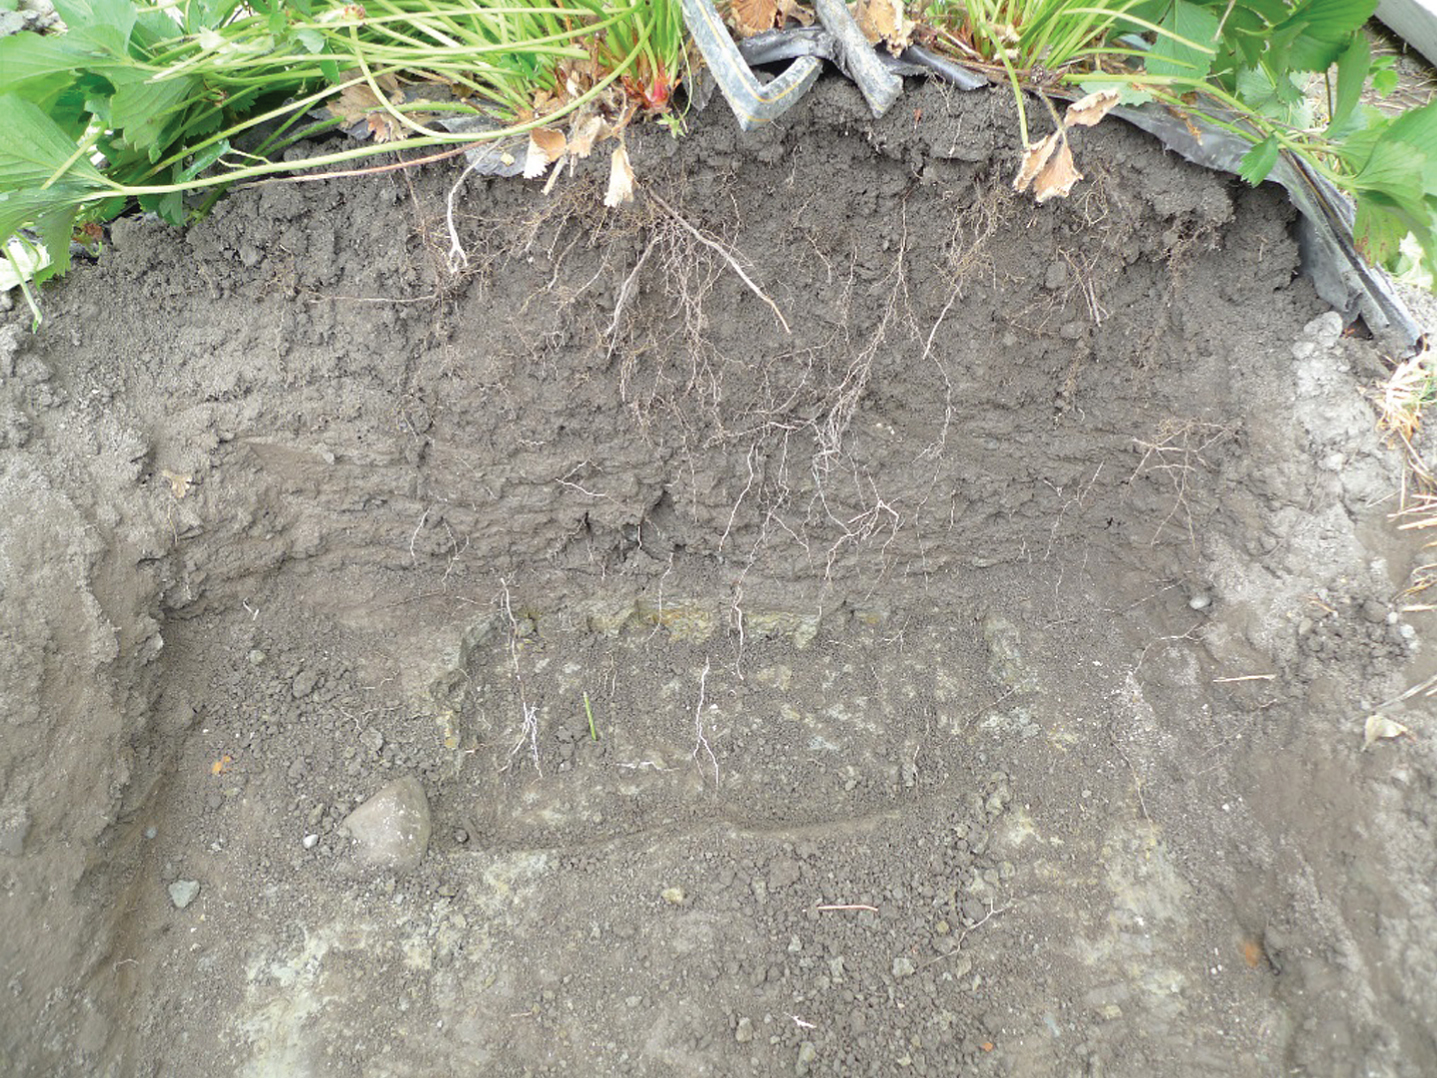 Cross section of a bed showing how strawberry roots distribute in the profile in August 2014 at fertilization level II. There were earthworm burrows, going deep into the plow layer.